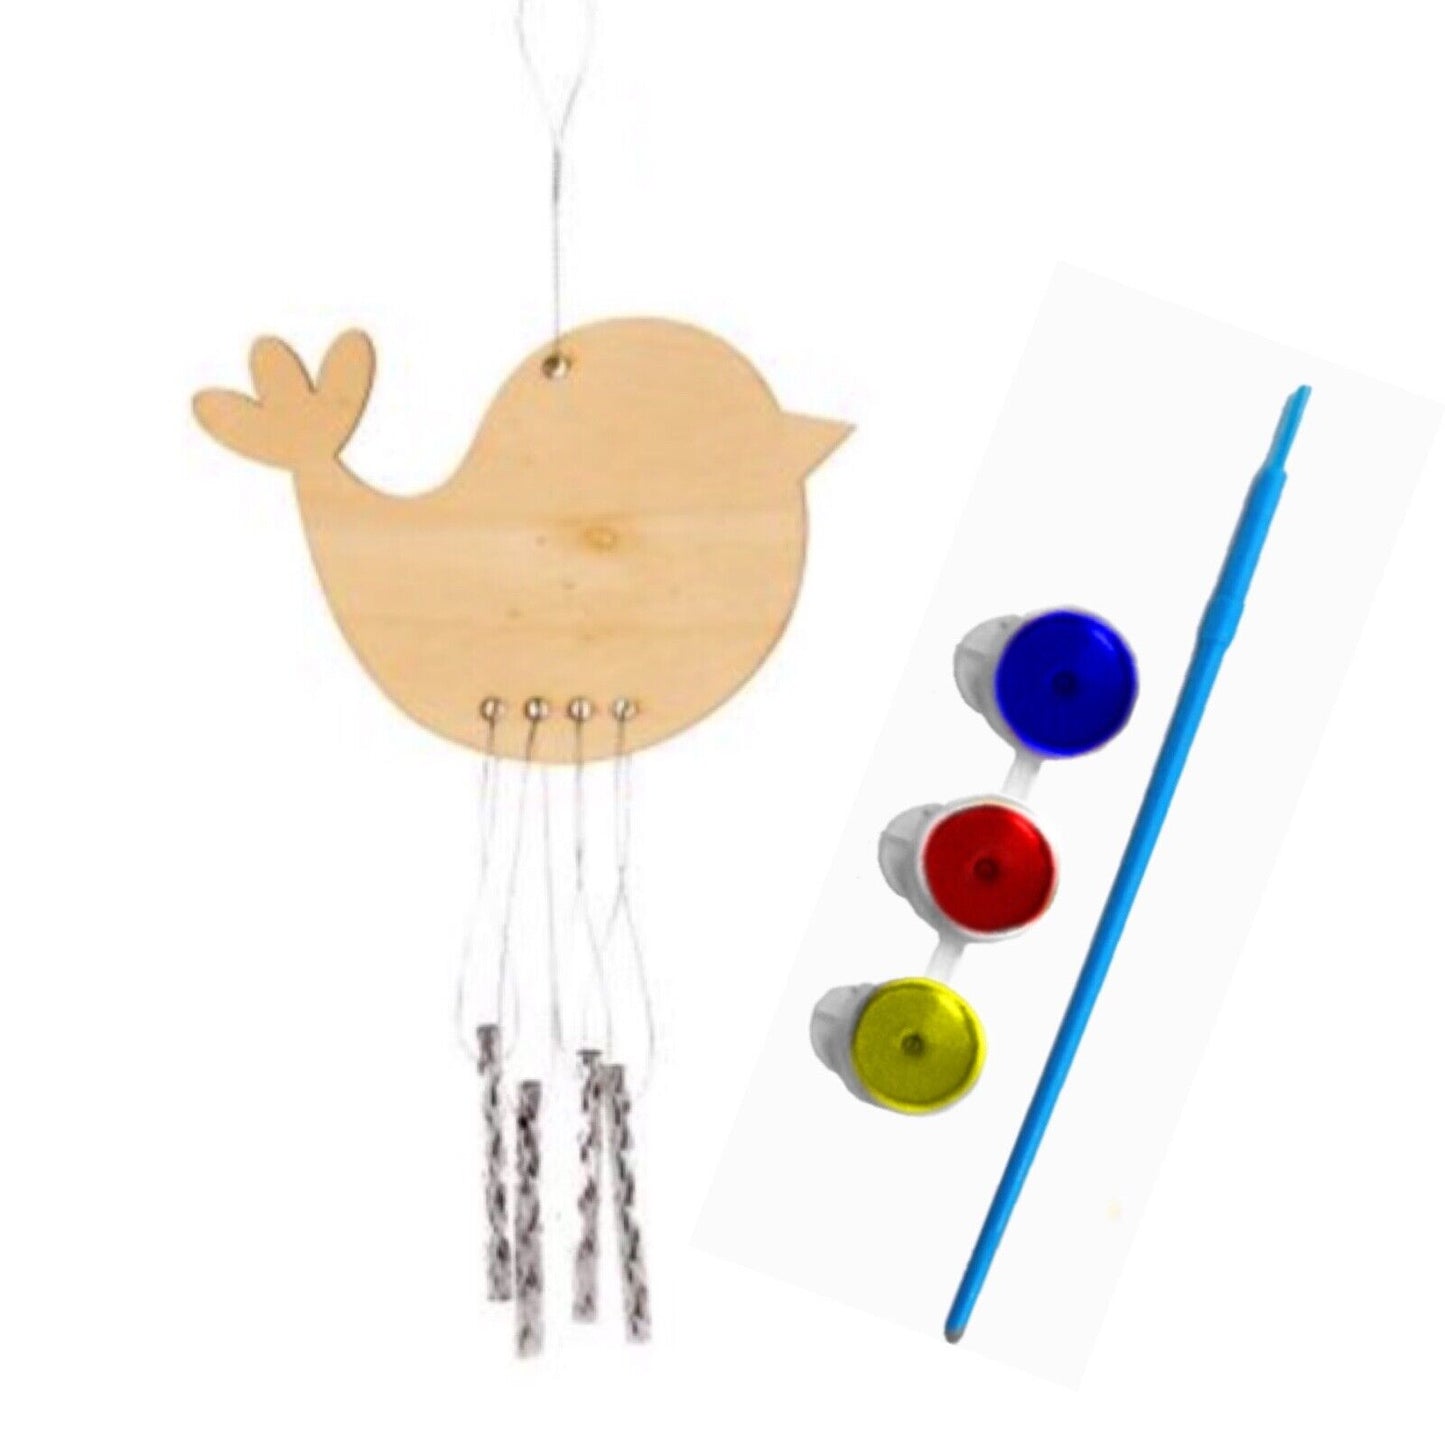 1x Design Your Own Cute Wooden Animals Windchime Kit